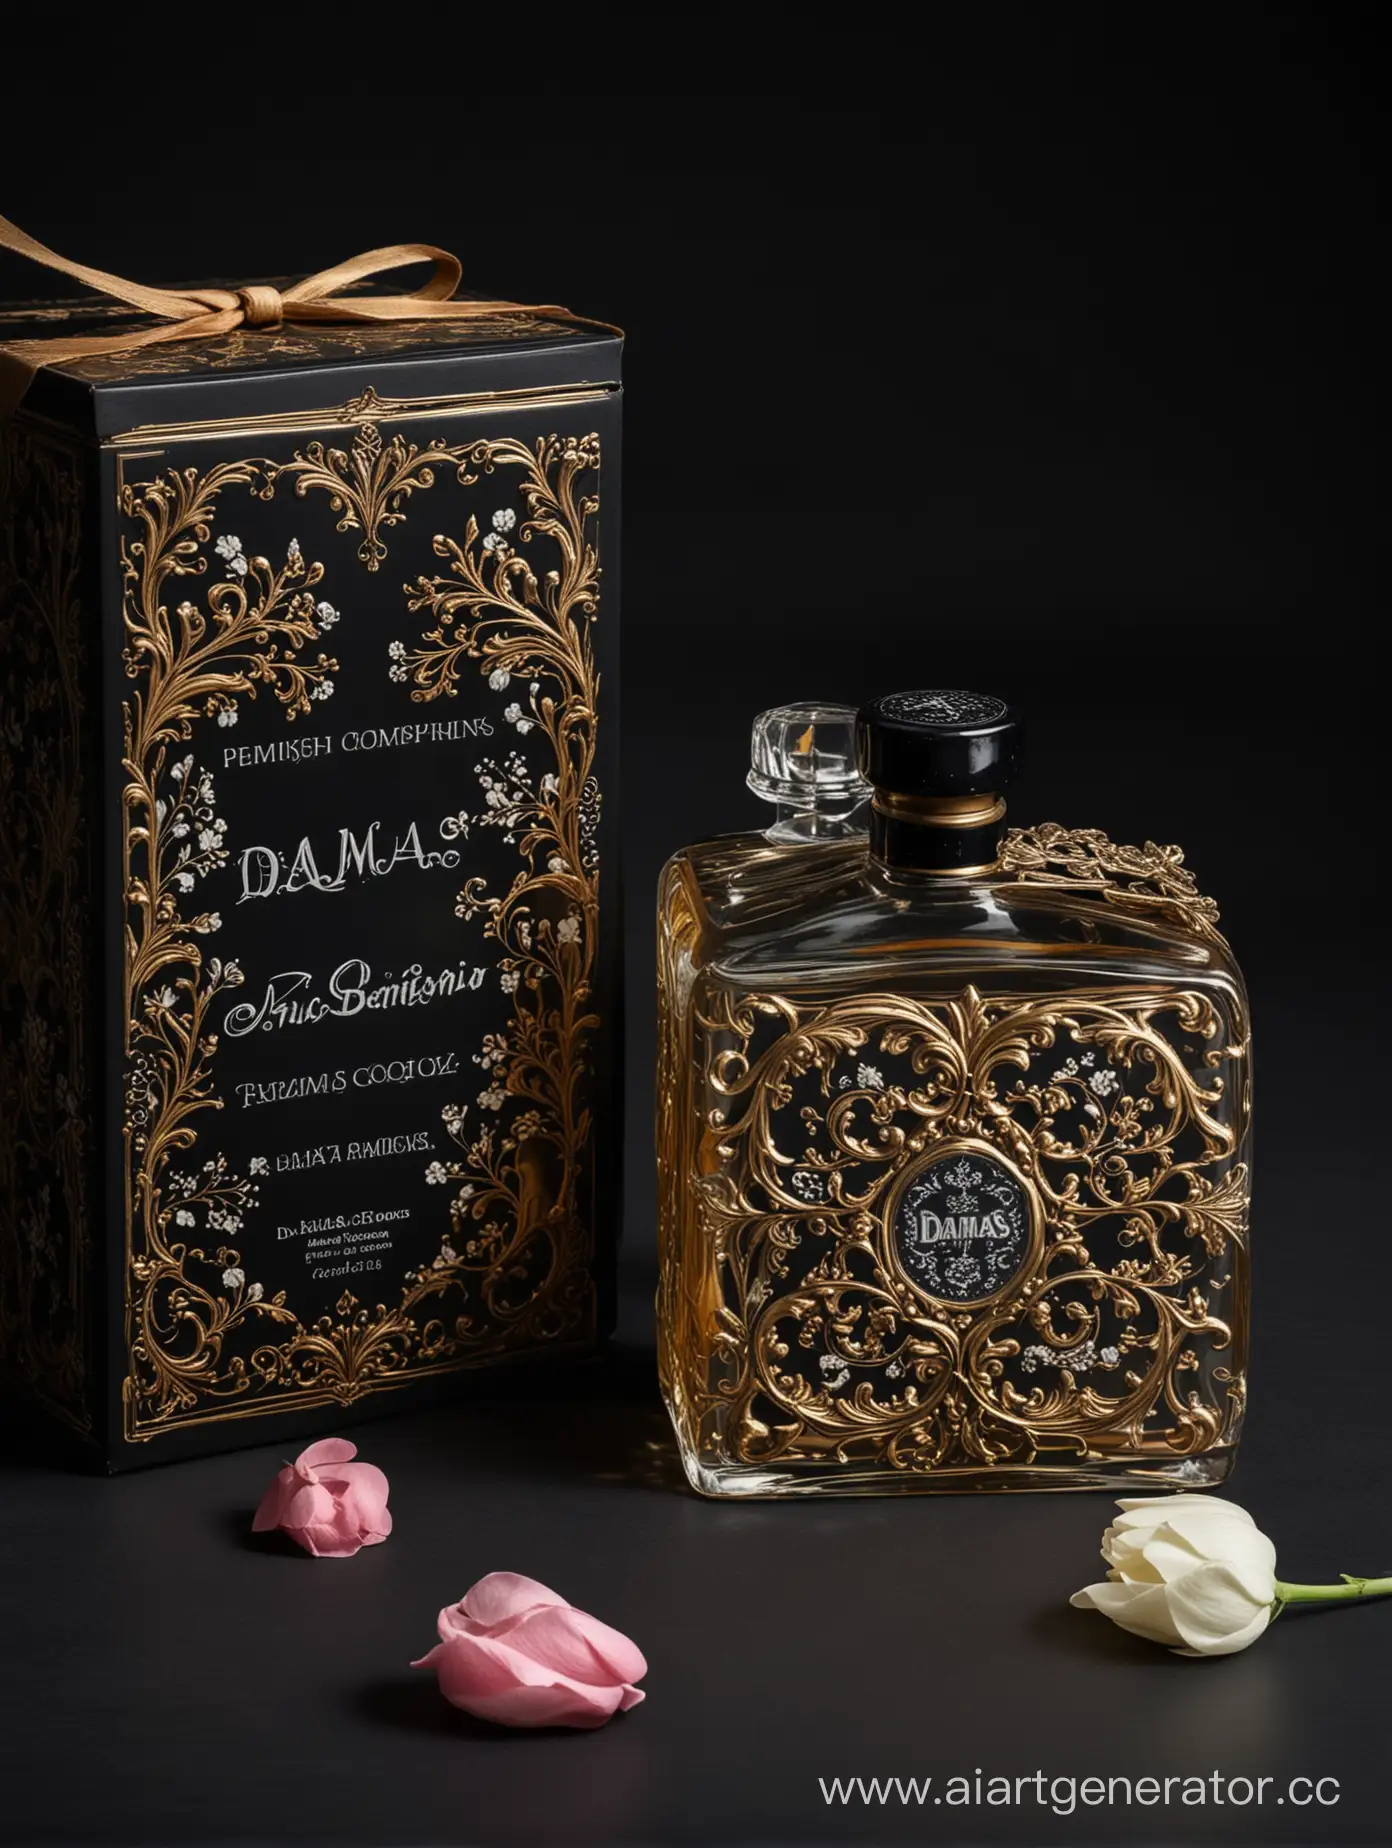 Flemish-Baroque-Painting-Inspired-Still-Life-with-Damas-Cologne-and-Contest-Winners-Box